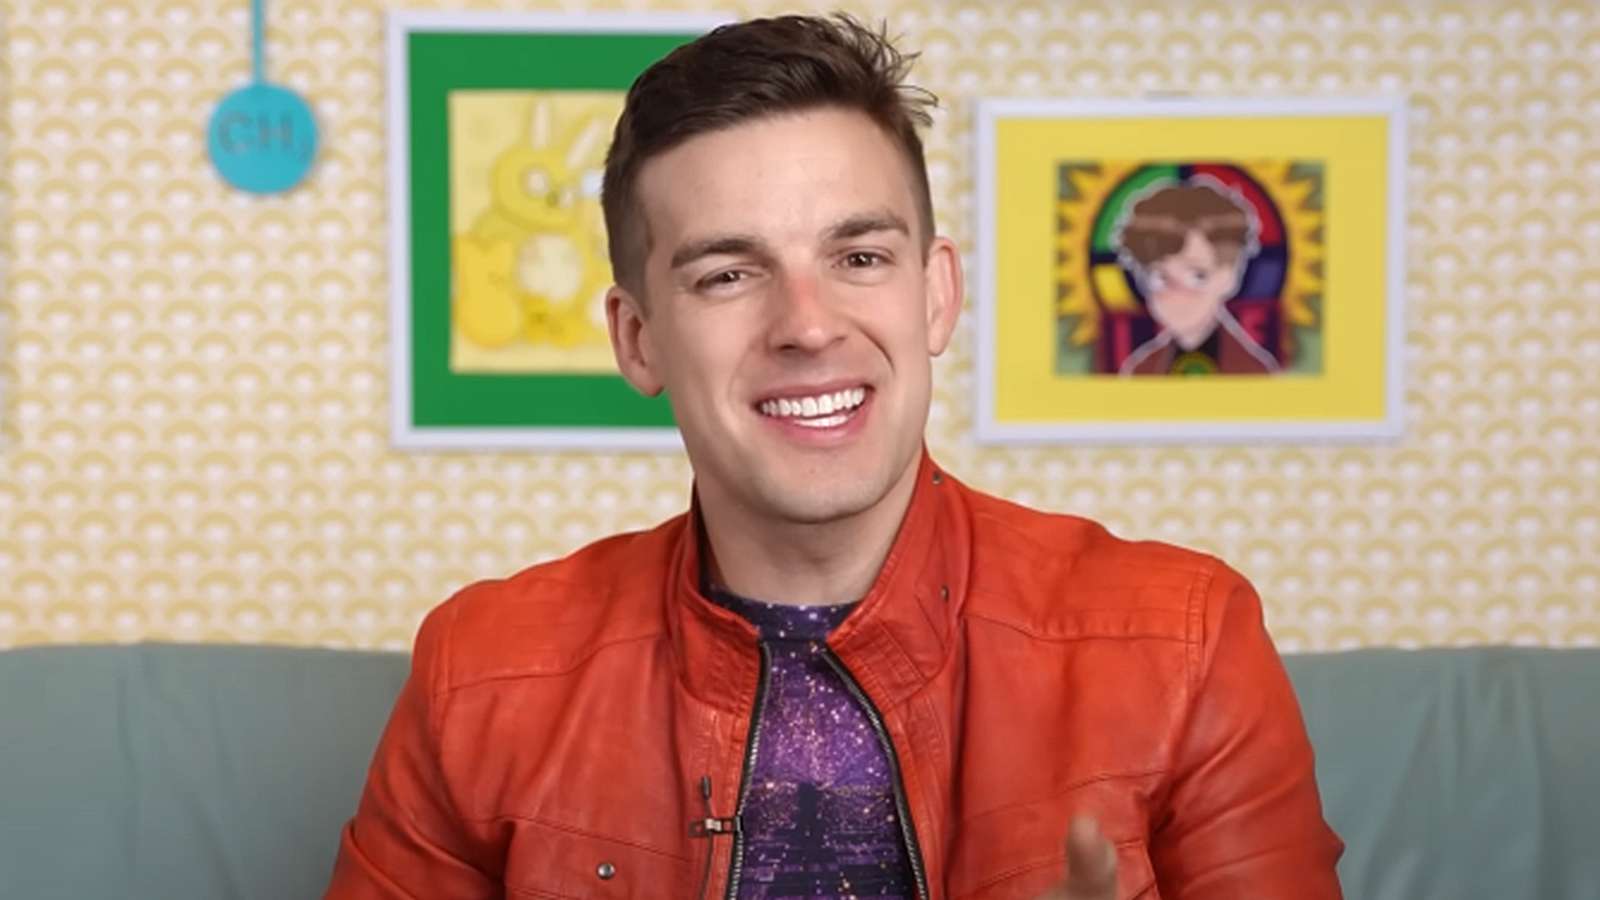 matpat-opens-up-new-projects-after-retirement-interview-youtube